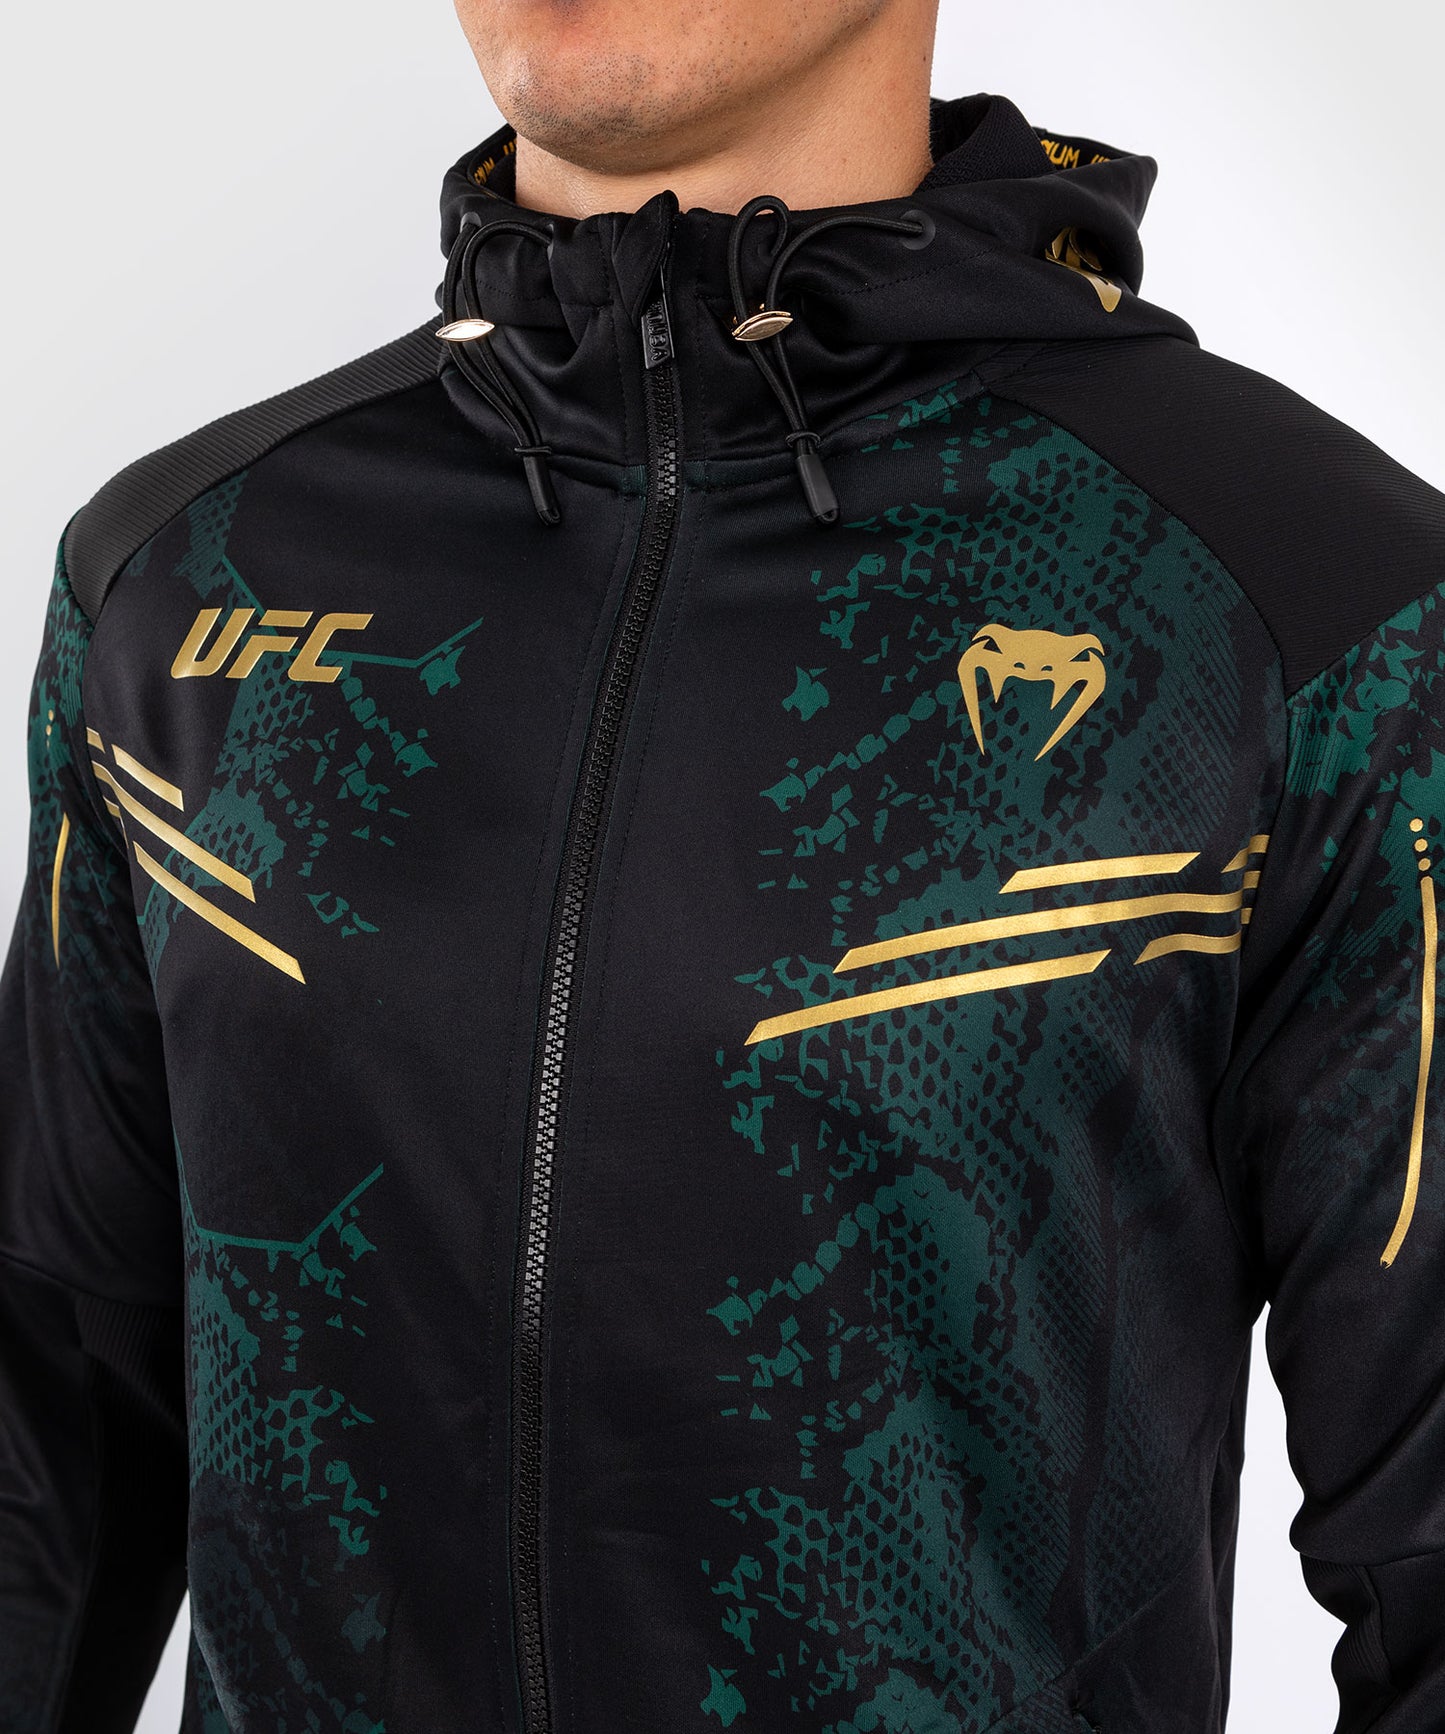 UFC Adrenaline by Venum Authentic Fight Night Men’s Walkout Hoodie - Emerald Edition - Green/Black/Gold